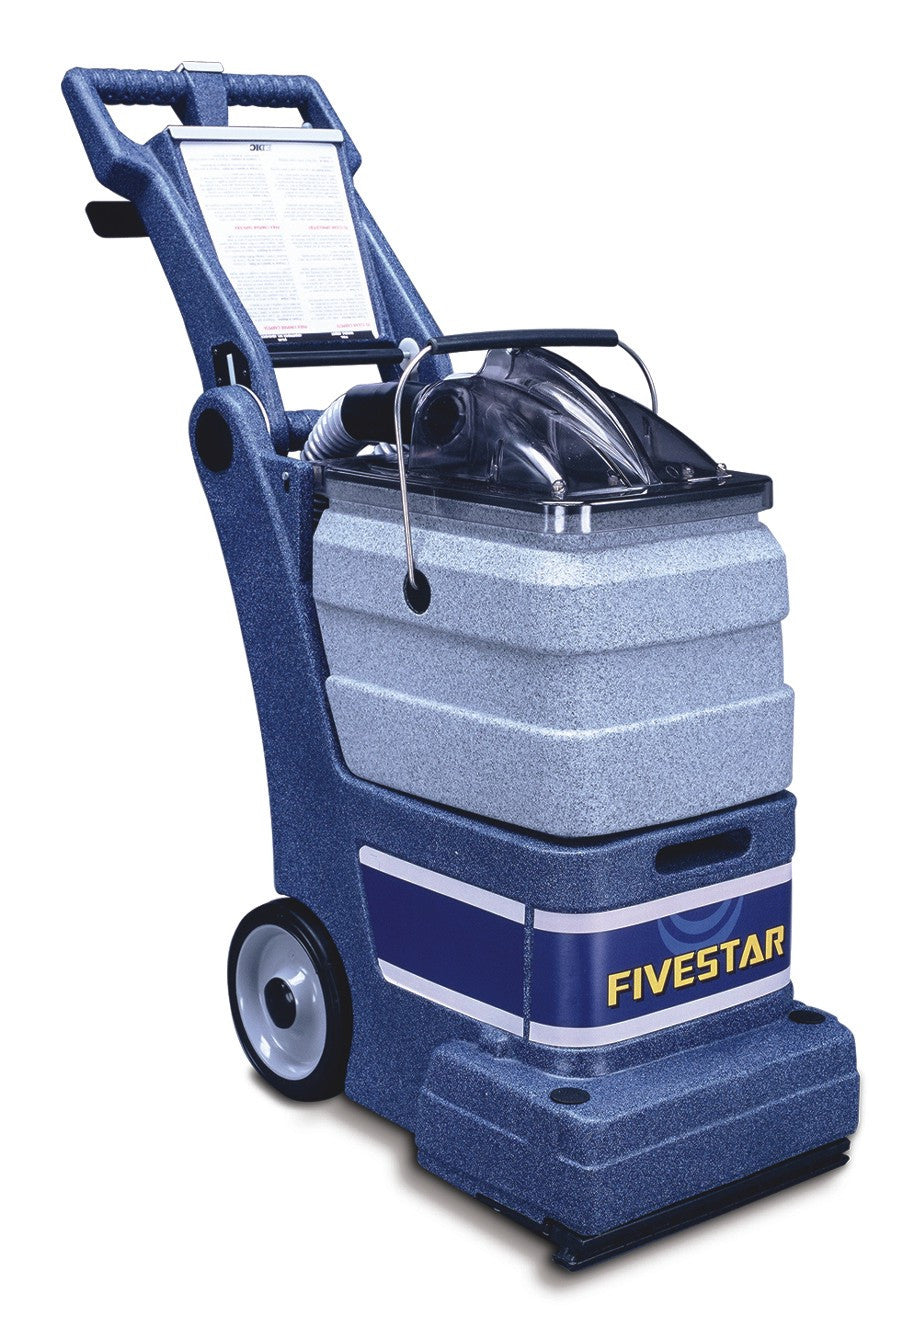 NIMBUS | Prochem TR300 Fivestar Carpet Cleaning Machine | Carpet and upholstery cleaning equipment, Carpet Cleaning Machine, Machines, Machines and Accessories, Portable Machines, Prochem, Prochem Machines, Type_Equipment, | Portable Machines